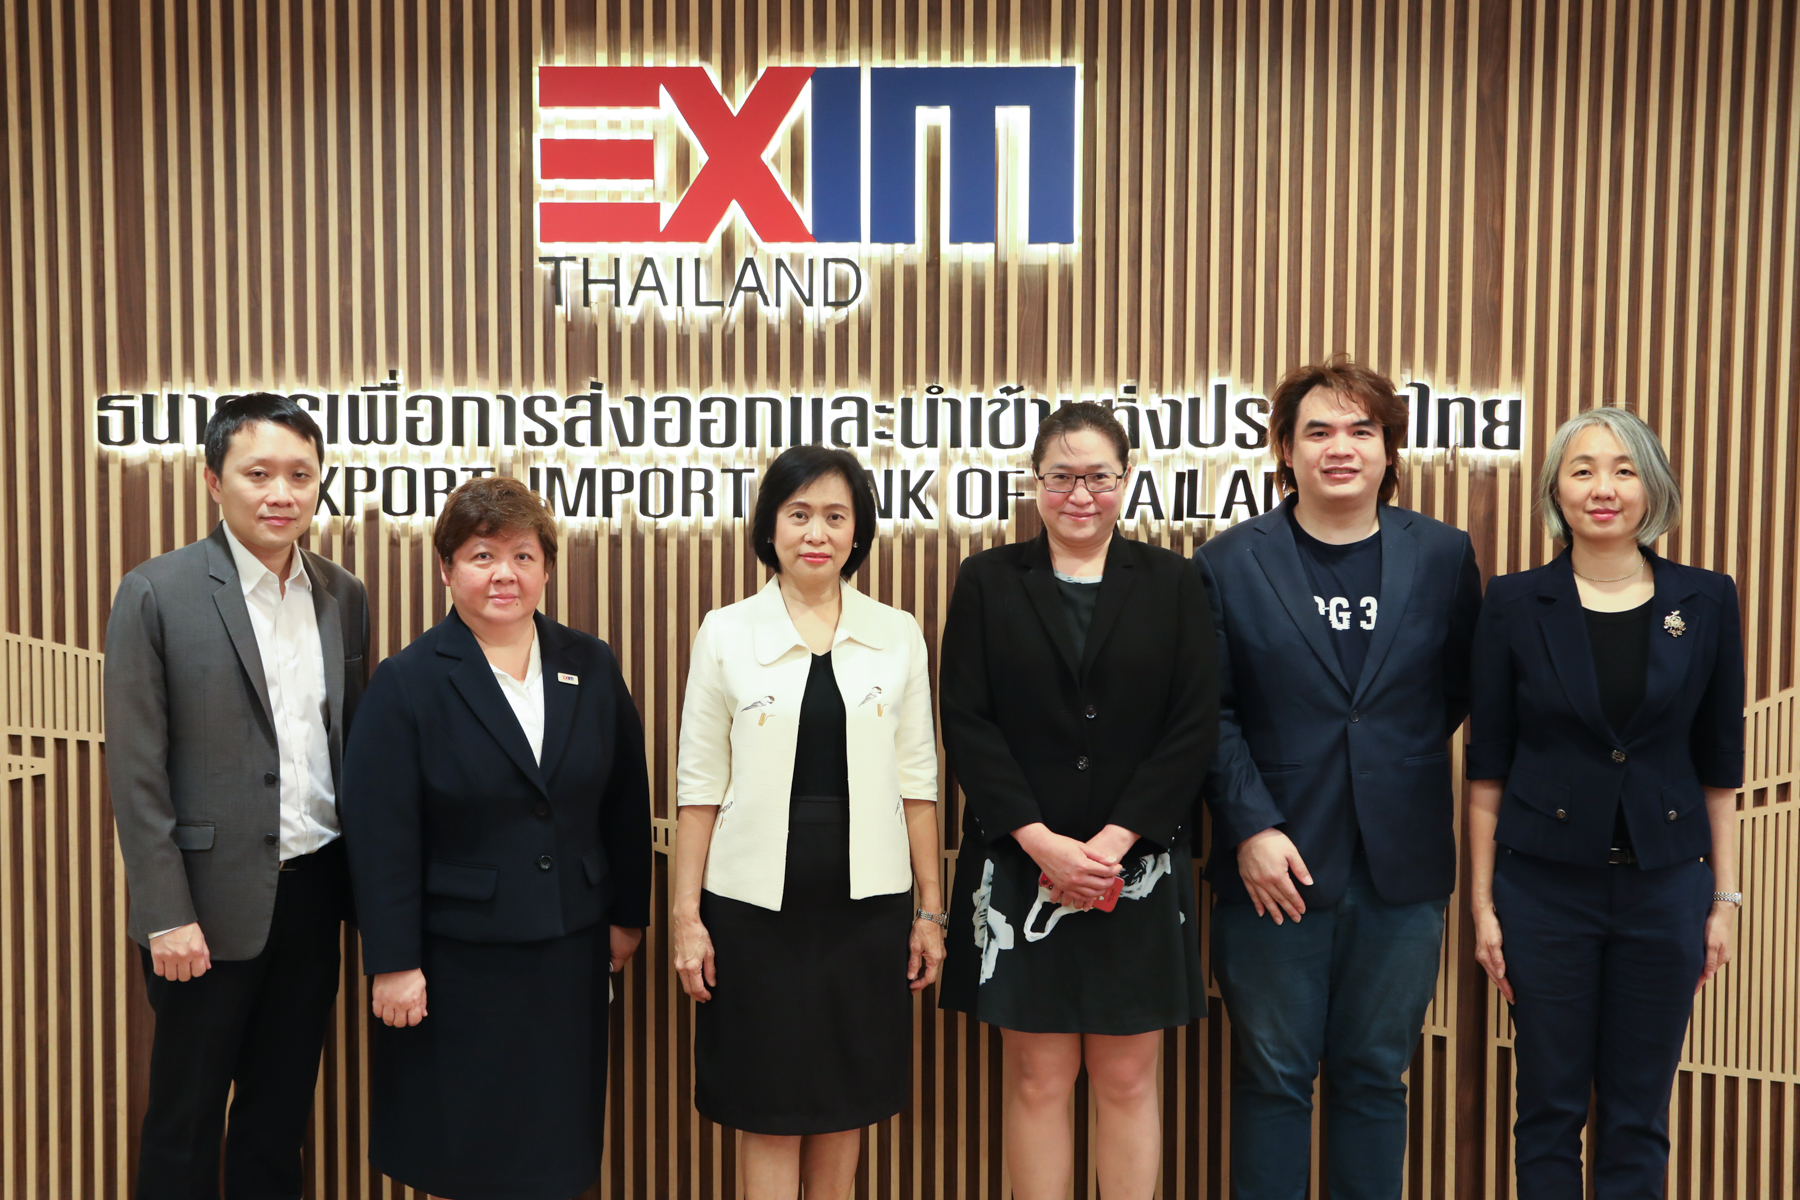 EXIM Thailand Joins Hand with PDPC Hosting Online Training on Compliance with Personal Data Protection Act for SMEs